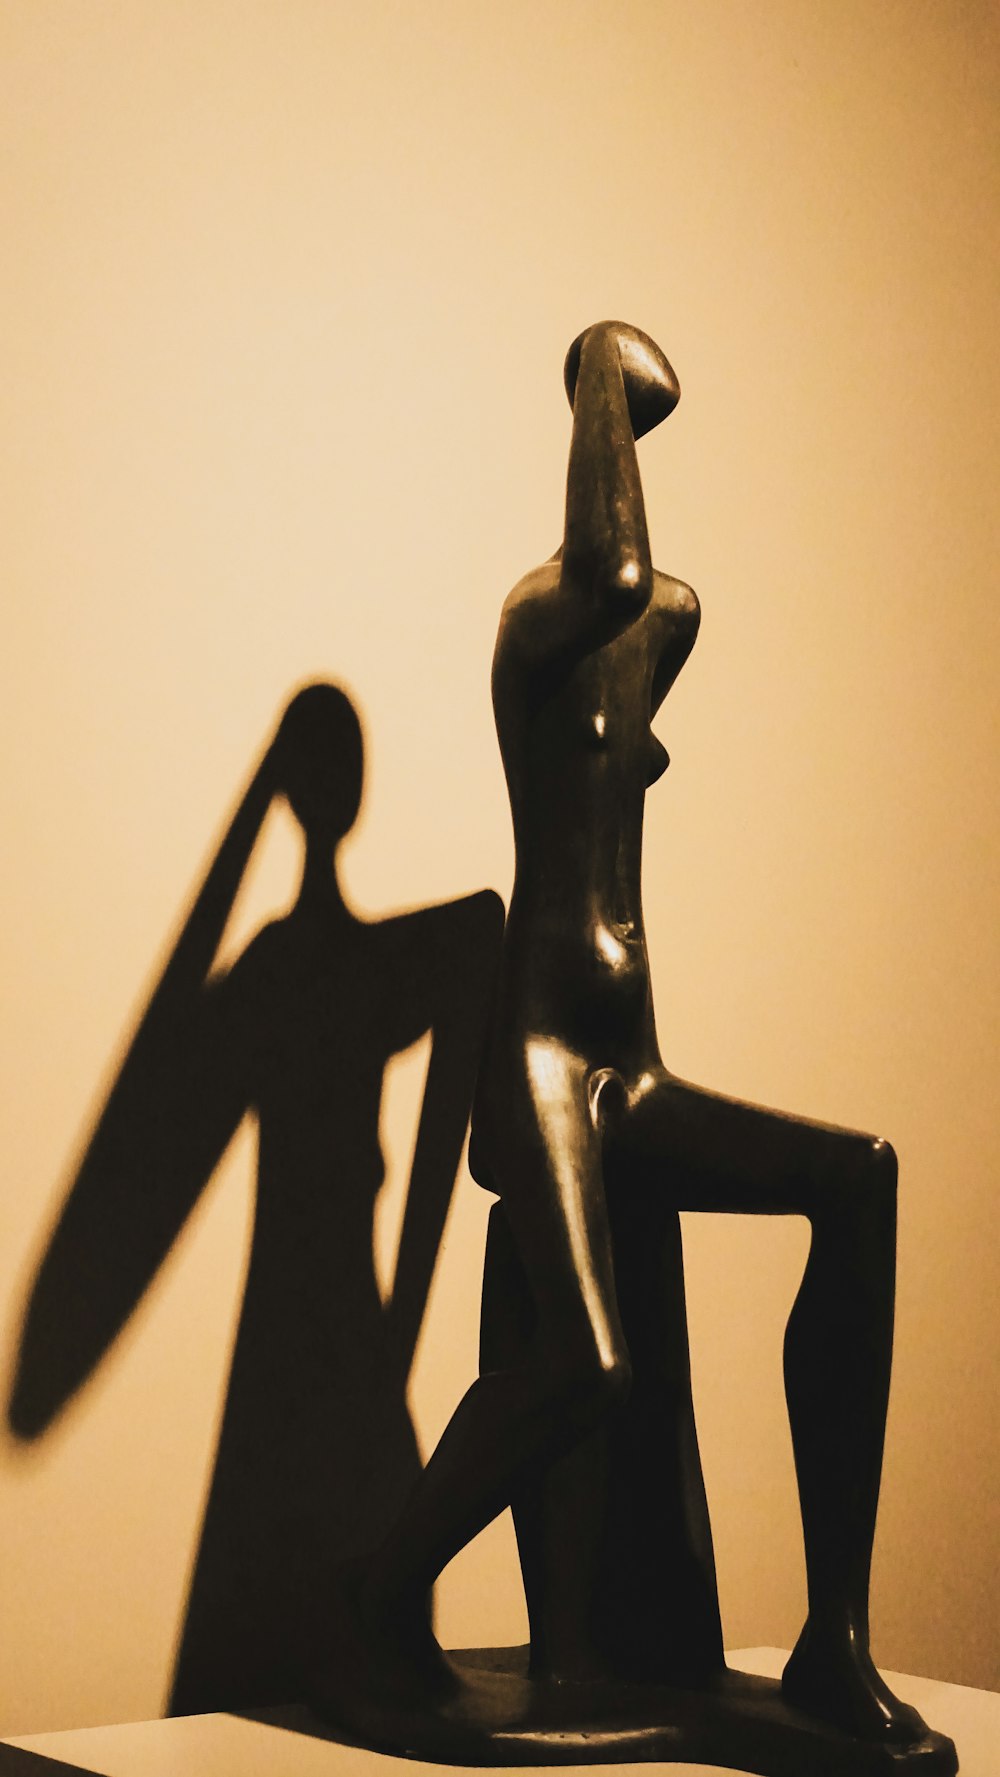 a shadow of a man and a woman on a table